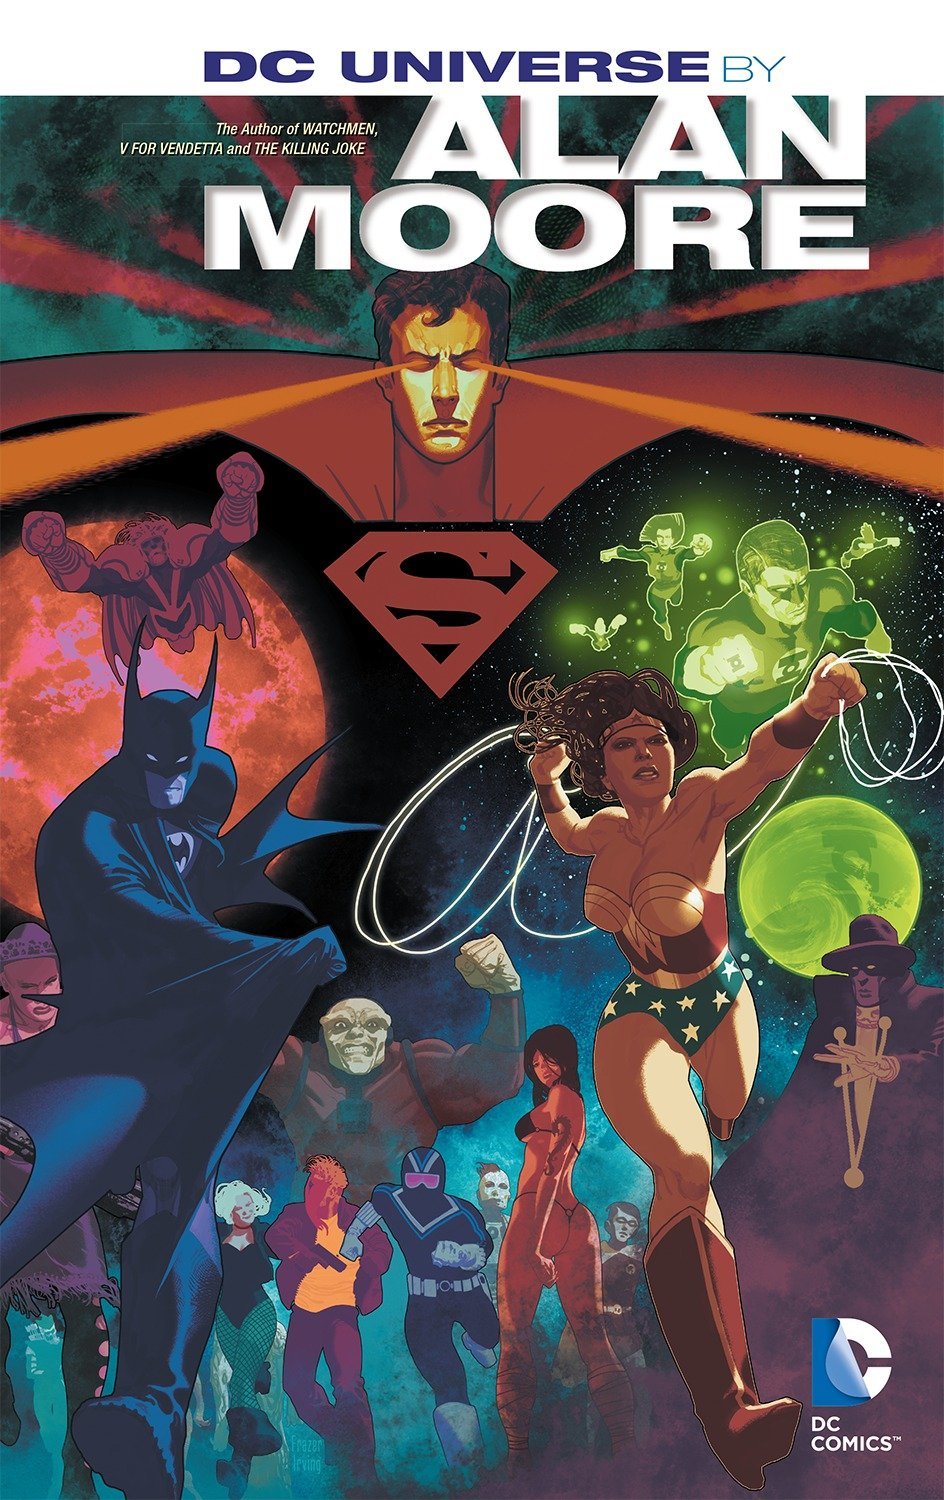 The DC Universe By Alan Moore